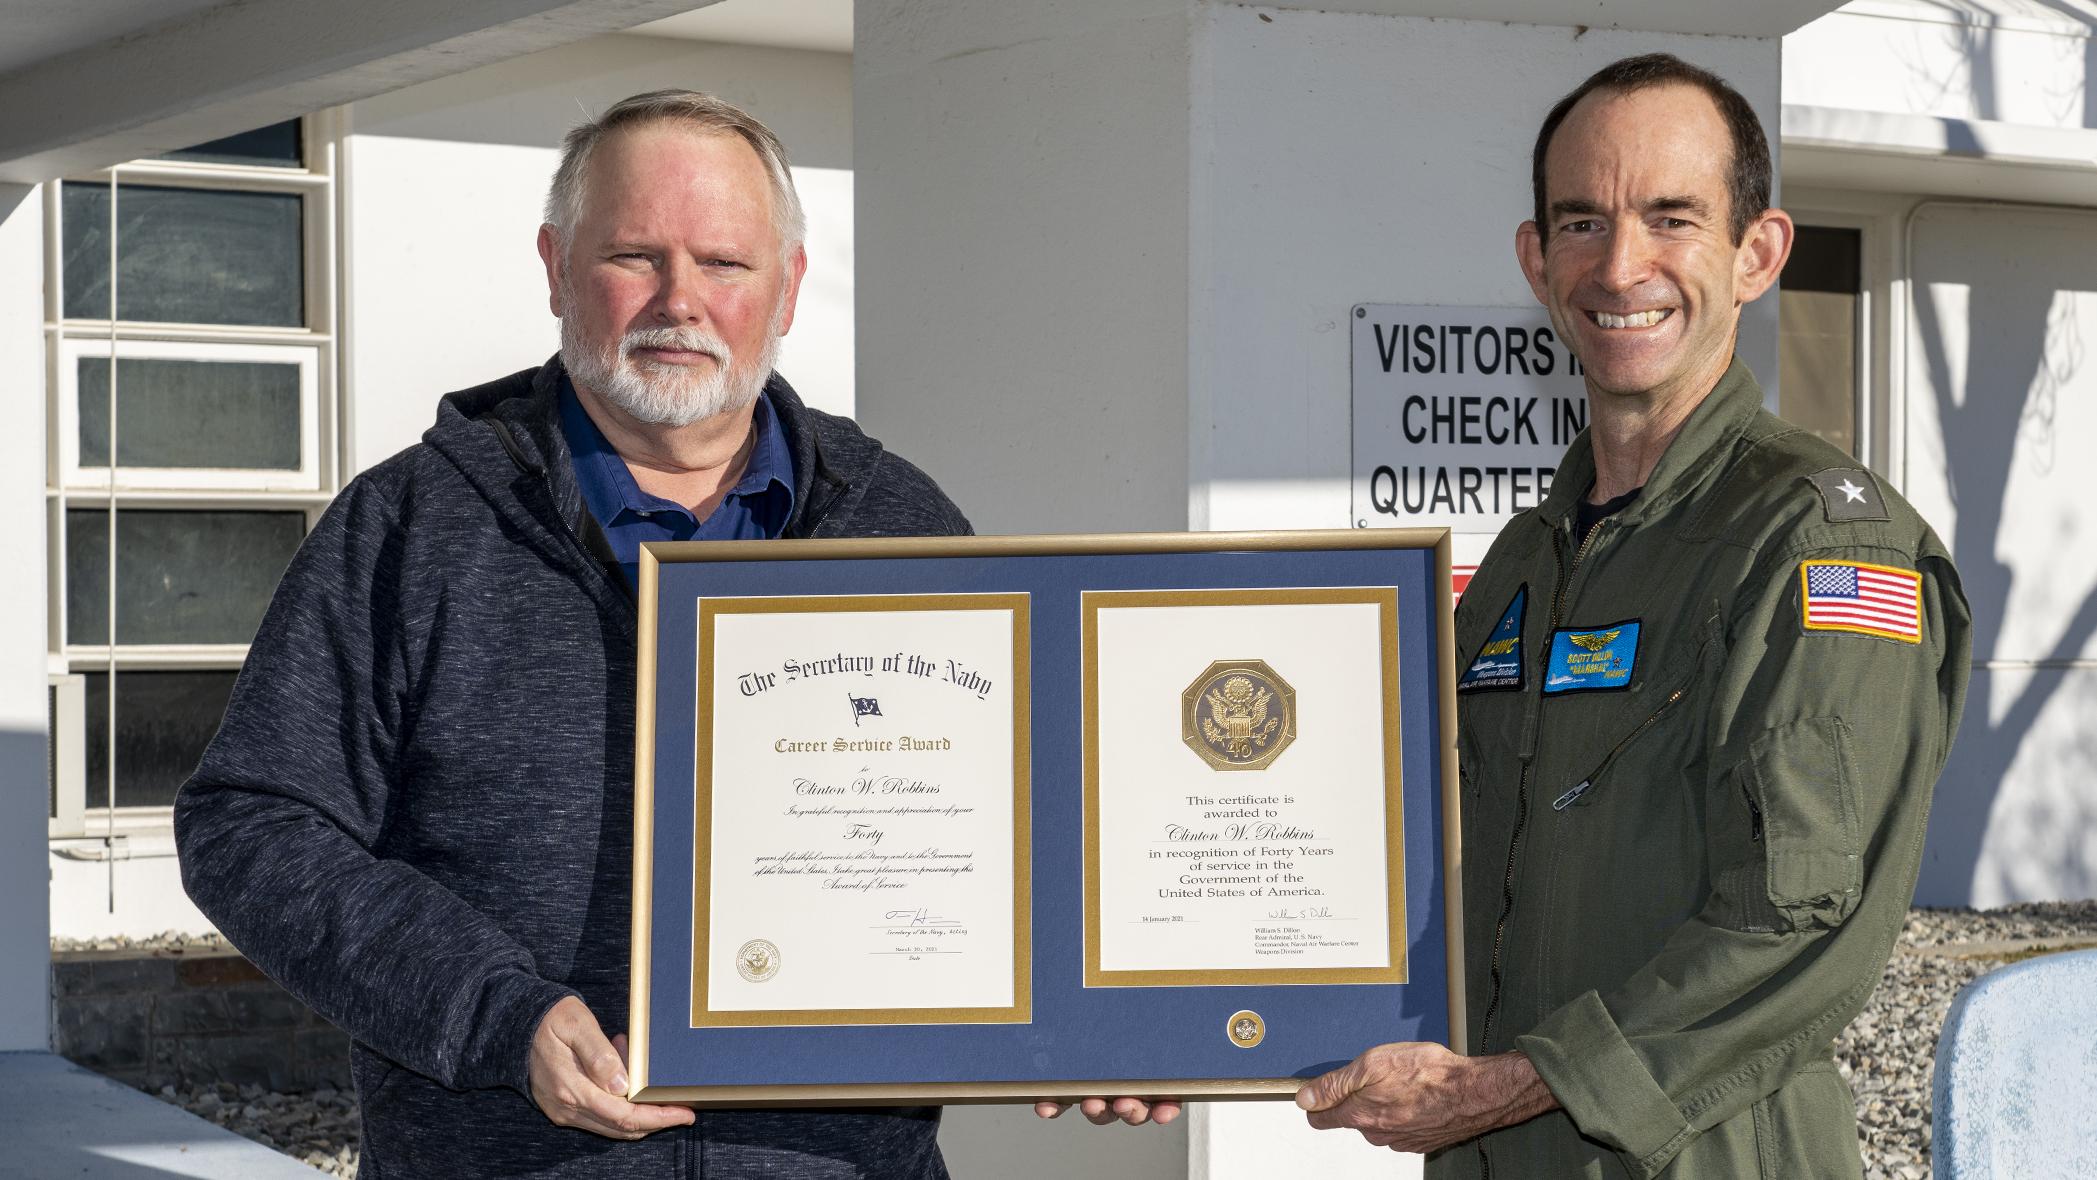 Clint Robbins poses with Rear Adm. Scott Dillon in front of the headquarters building in China Lake after receiving a 40-year length-of-service award on Jan. 6. (U.S. Navy photo by Ryan Smith)